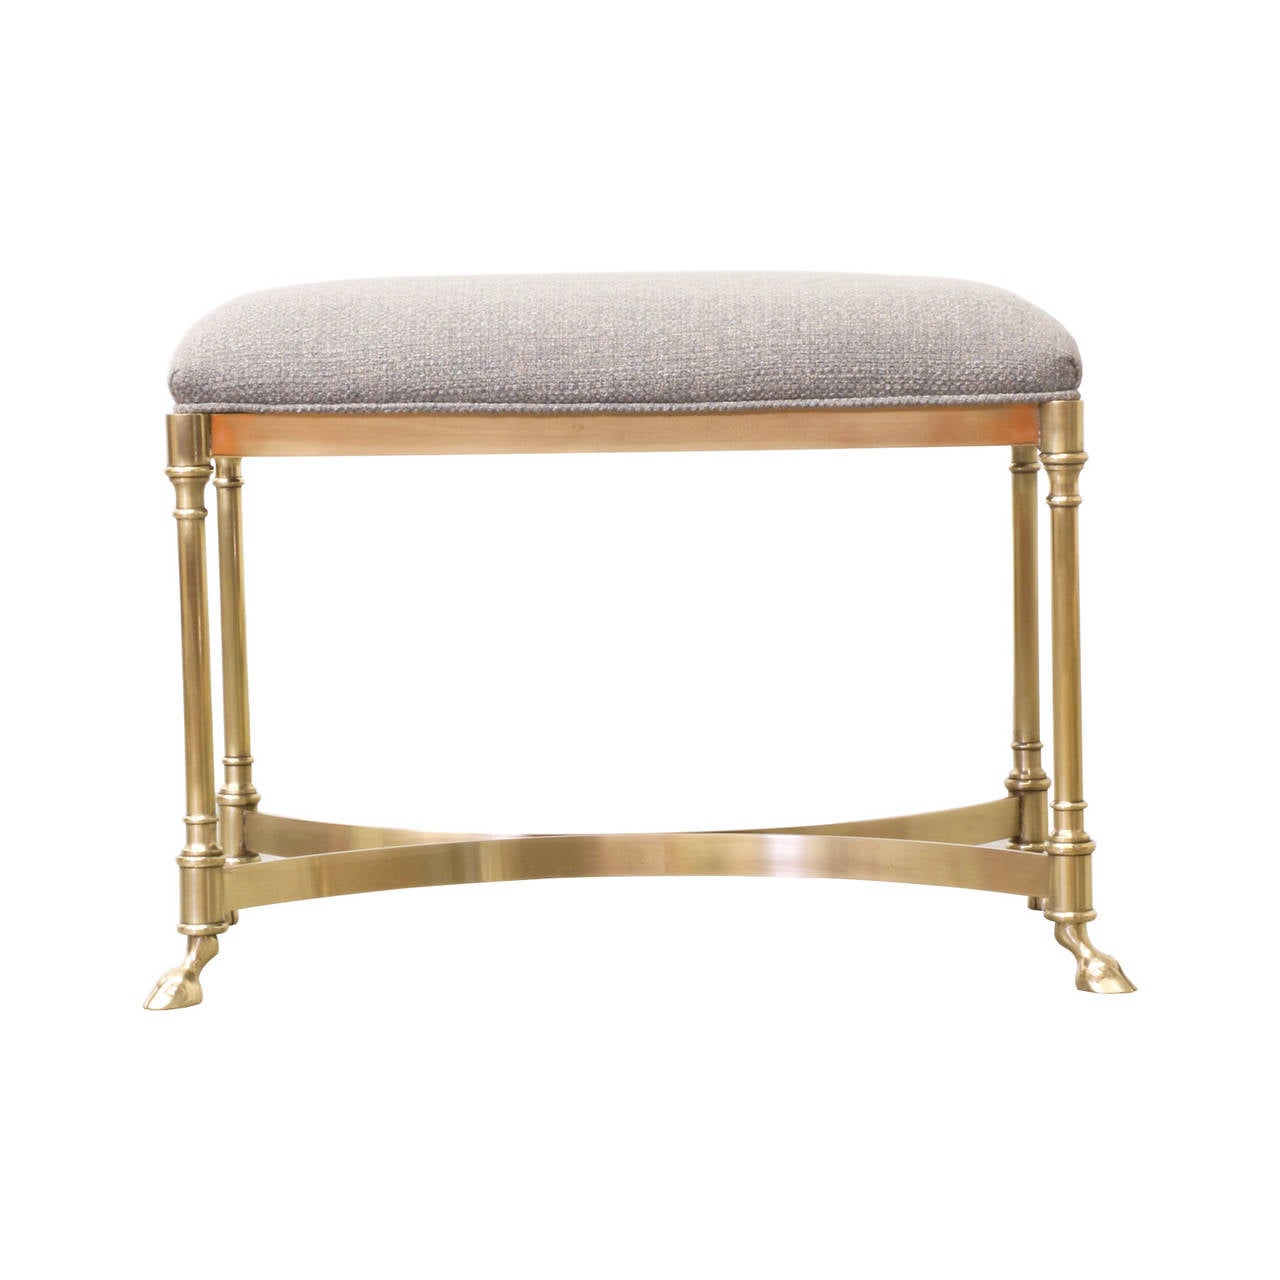 Designer: Unknown
Manufacturer: Unknown
Period/Style: Mid Century Modern
Country: Italy
Date: 1970’s

Dimensions: 19″H x 26.25″W x 16.75″D
Materials: Brass
Condition: Excellent – Newly Reupholstered
Number of Items: 1
ID Number: